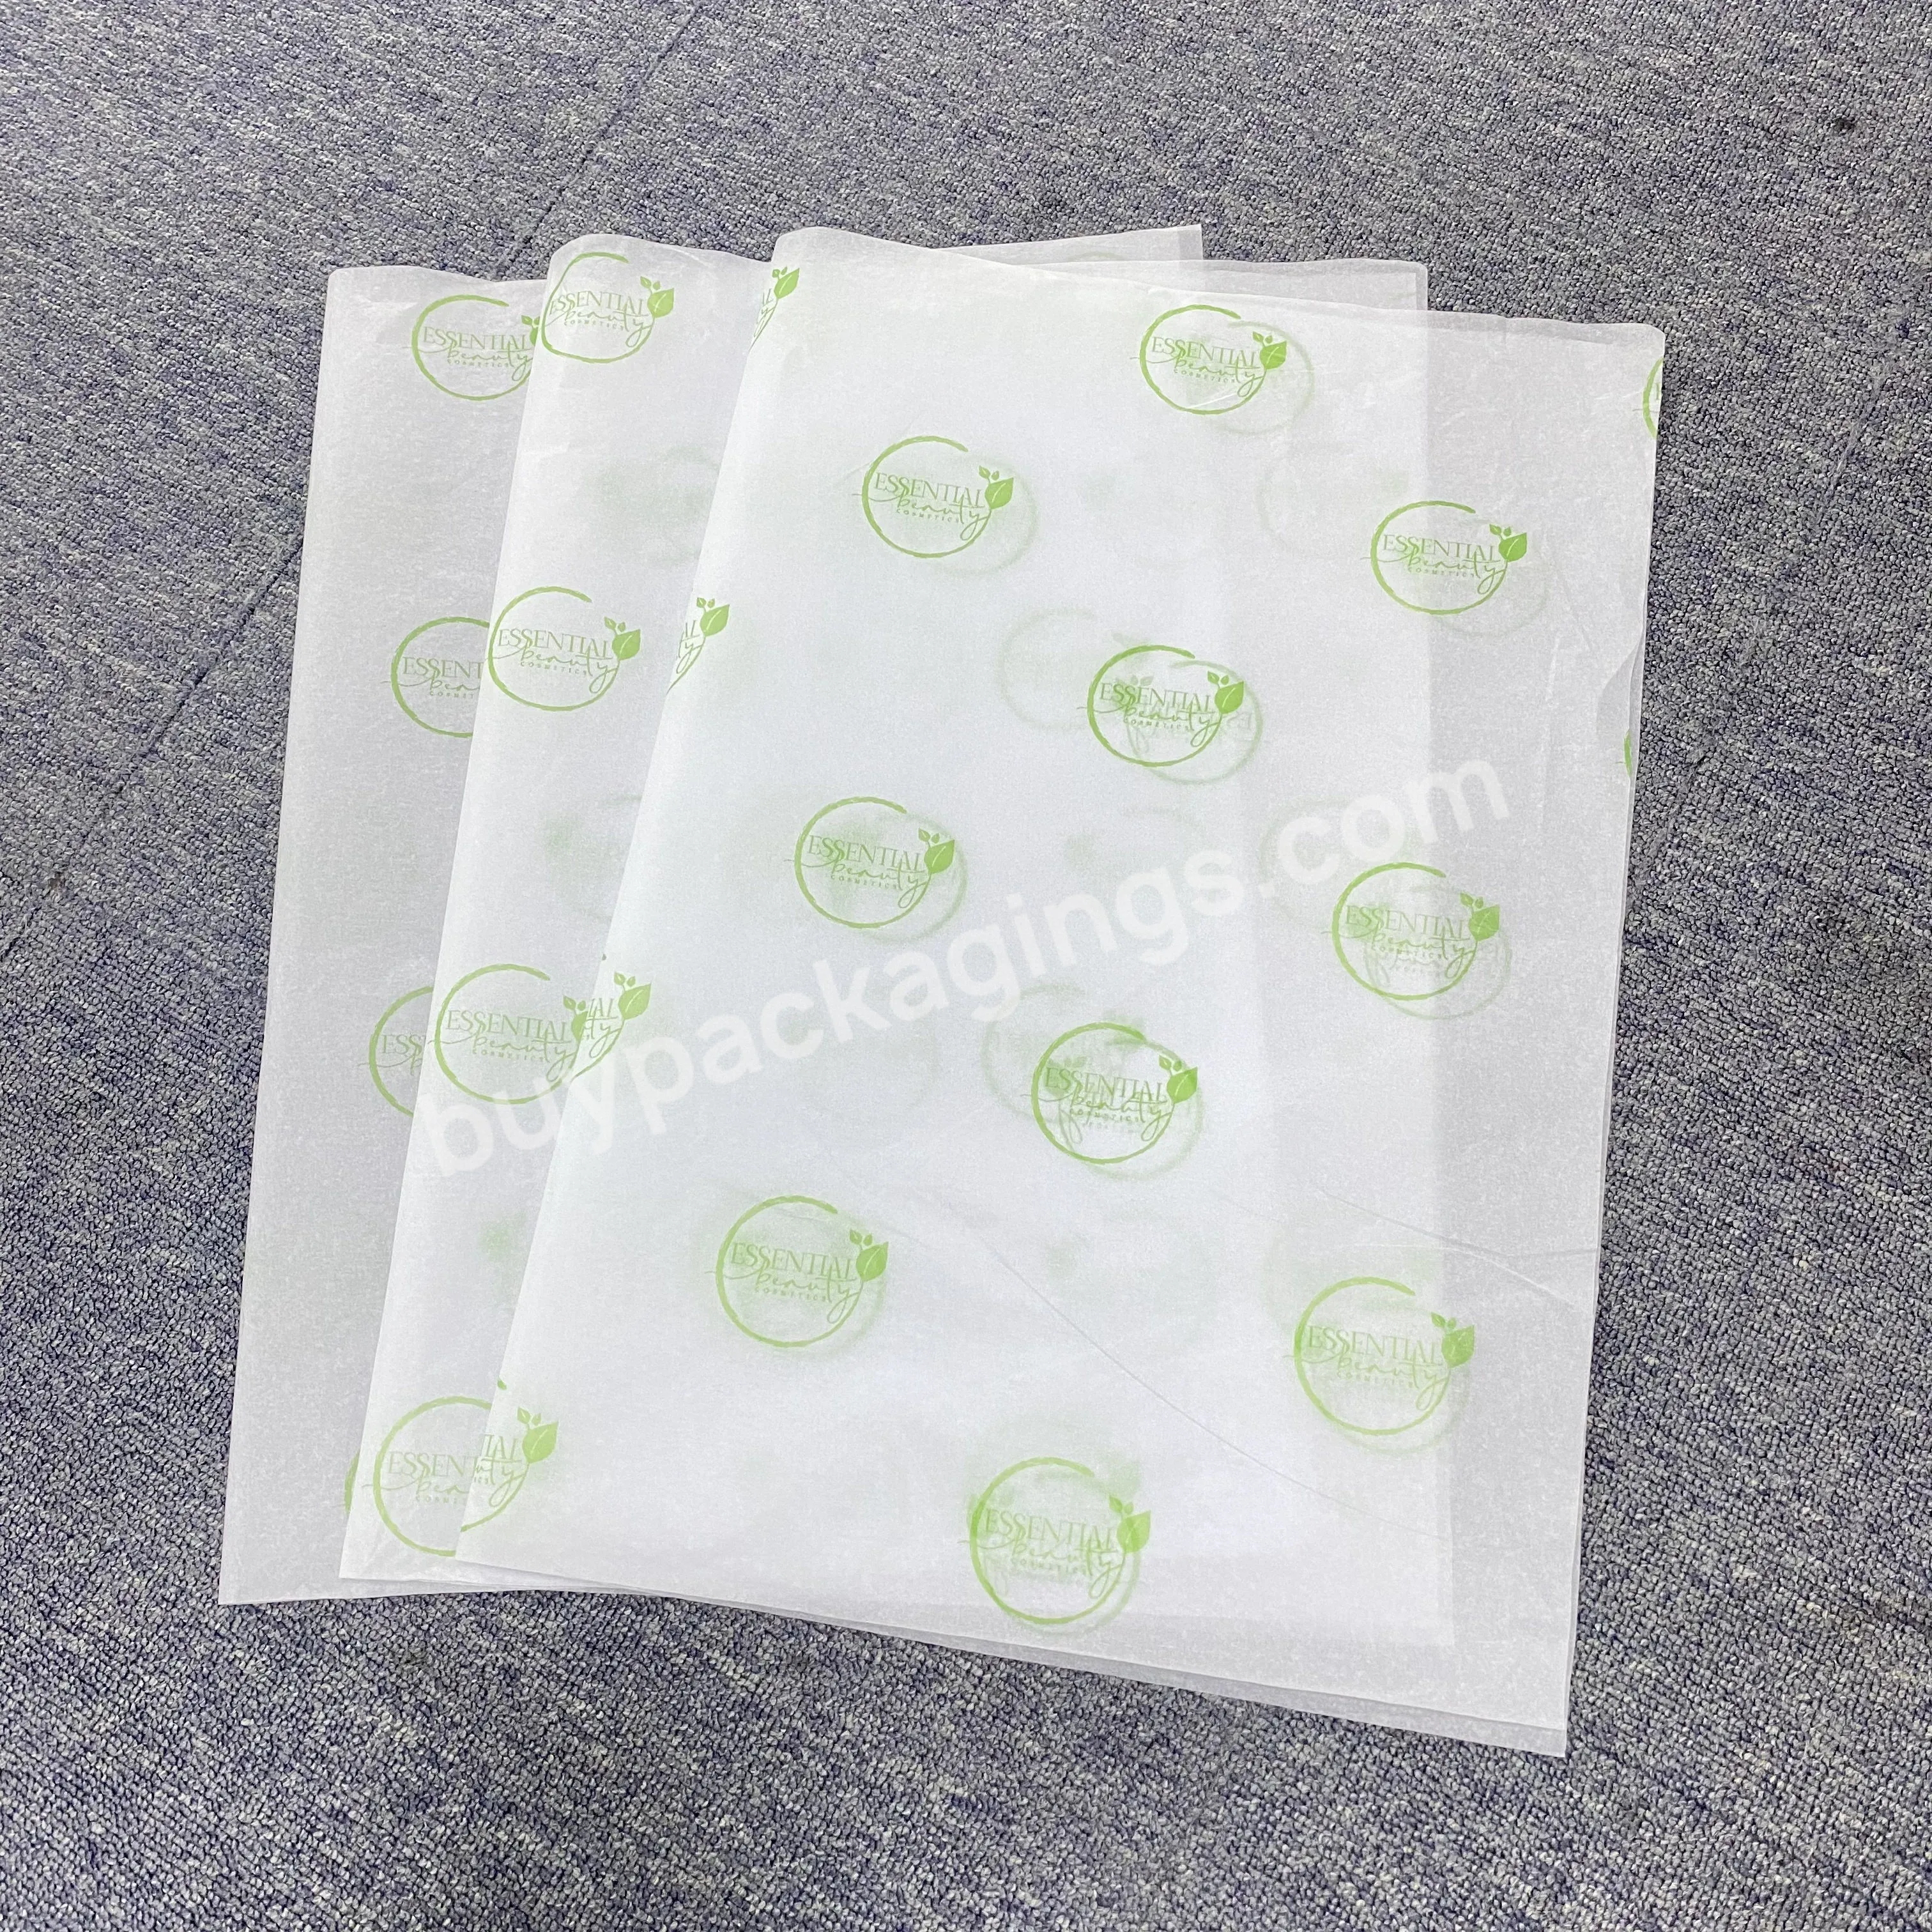 Low Moq 50*70cm Wrapping Tissue Paper Custom Size Logo Print Eco-friendly Gift Packaging Bag Tissue Modern Design